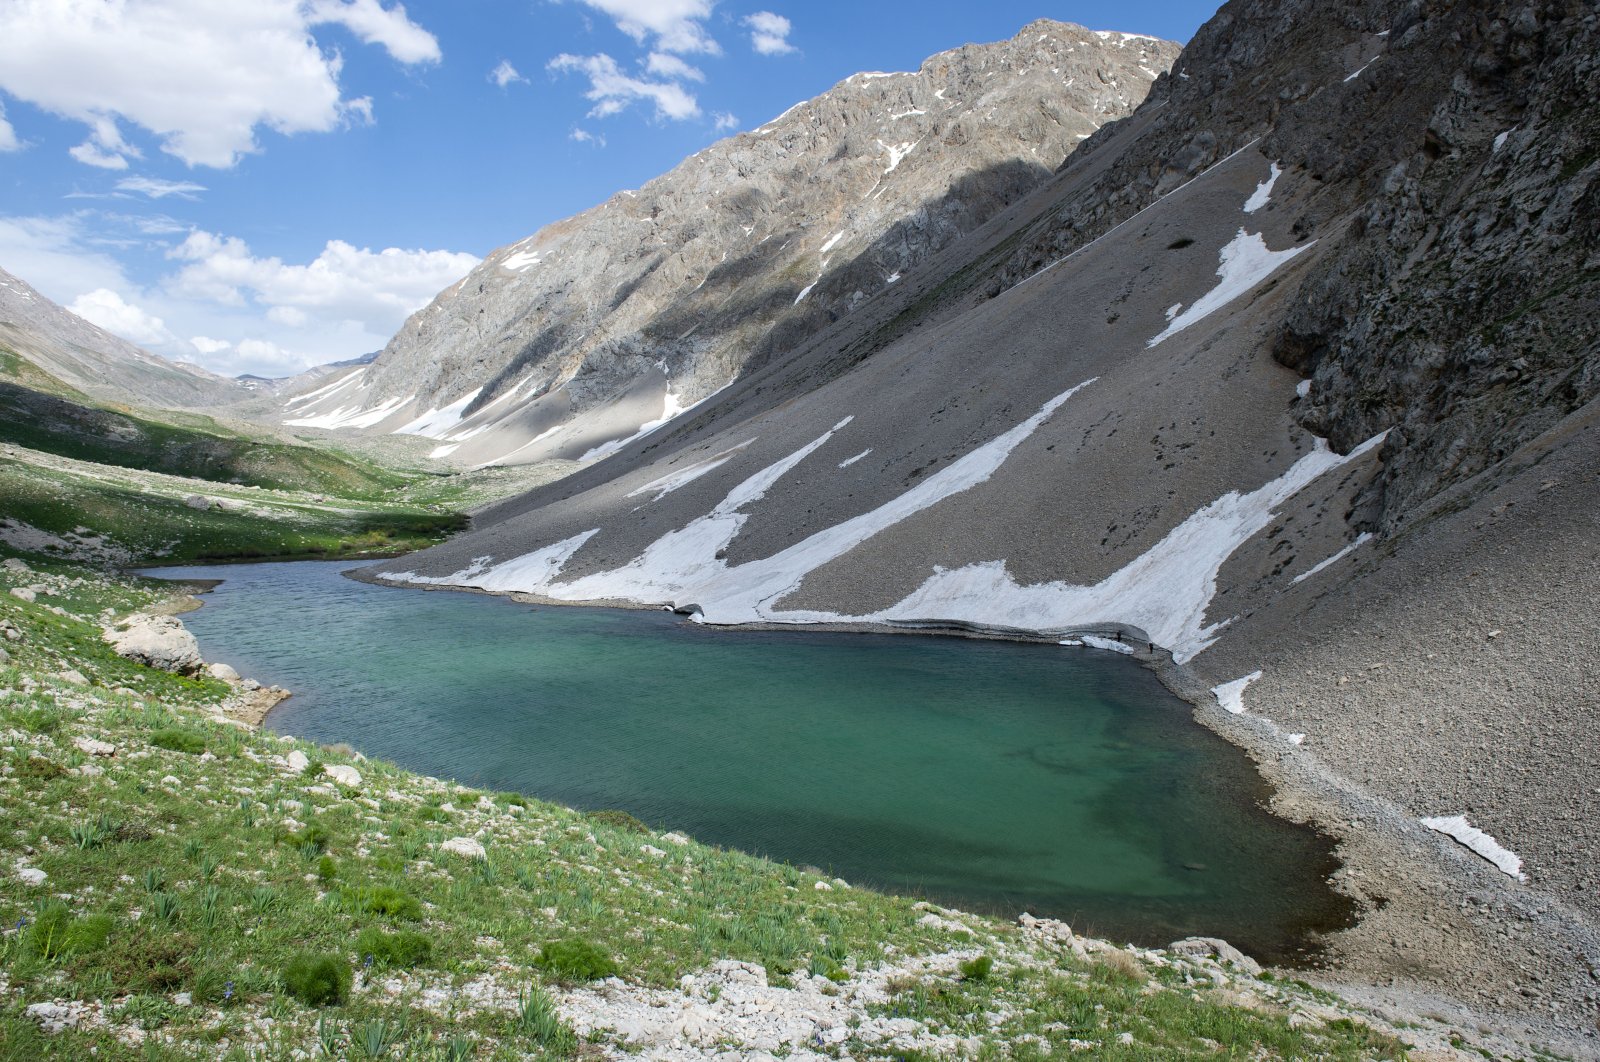 The glacial lakes formed by melting snow in the Mercan Valley in eastern Turkey are a popular destination for camping, photography and trekking enthusiasts. (AA Photo)